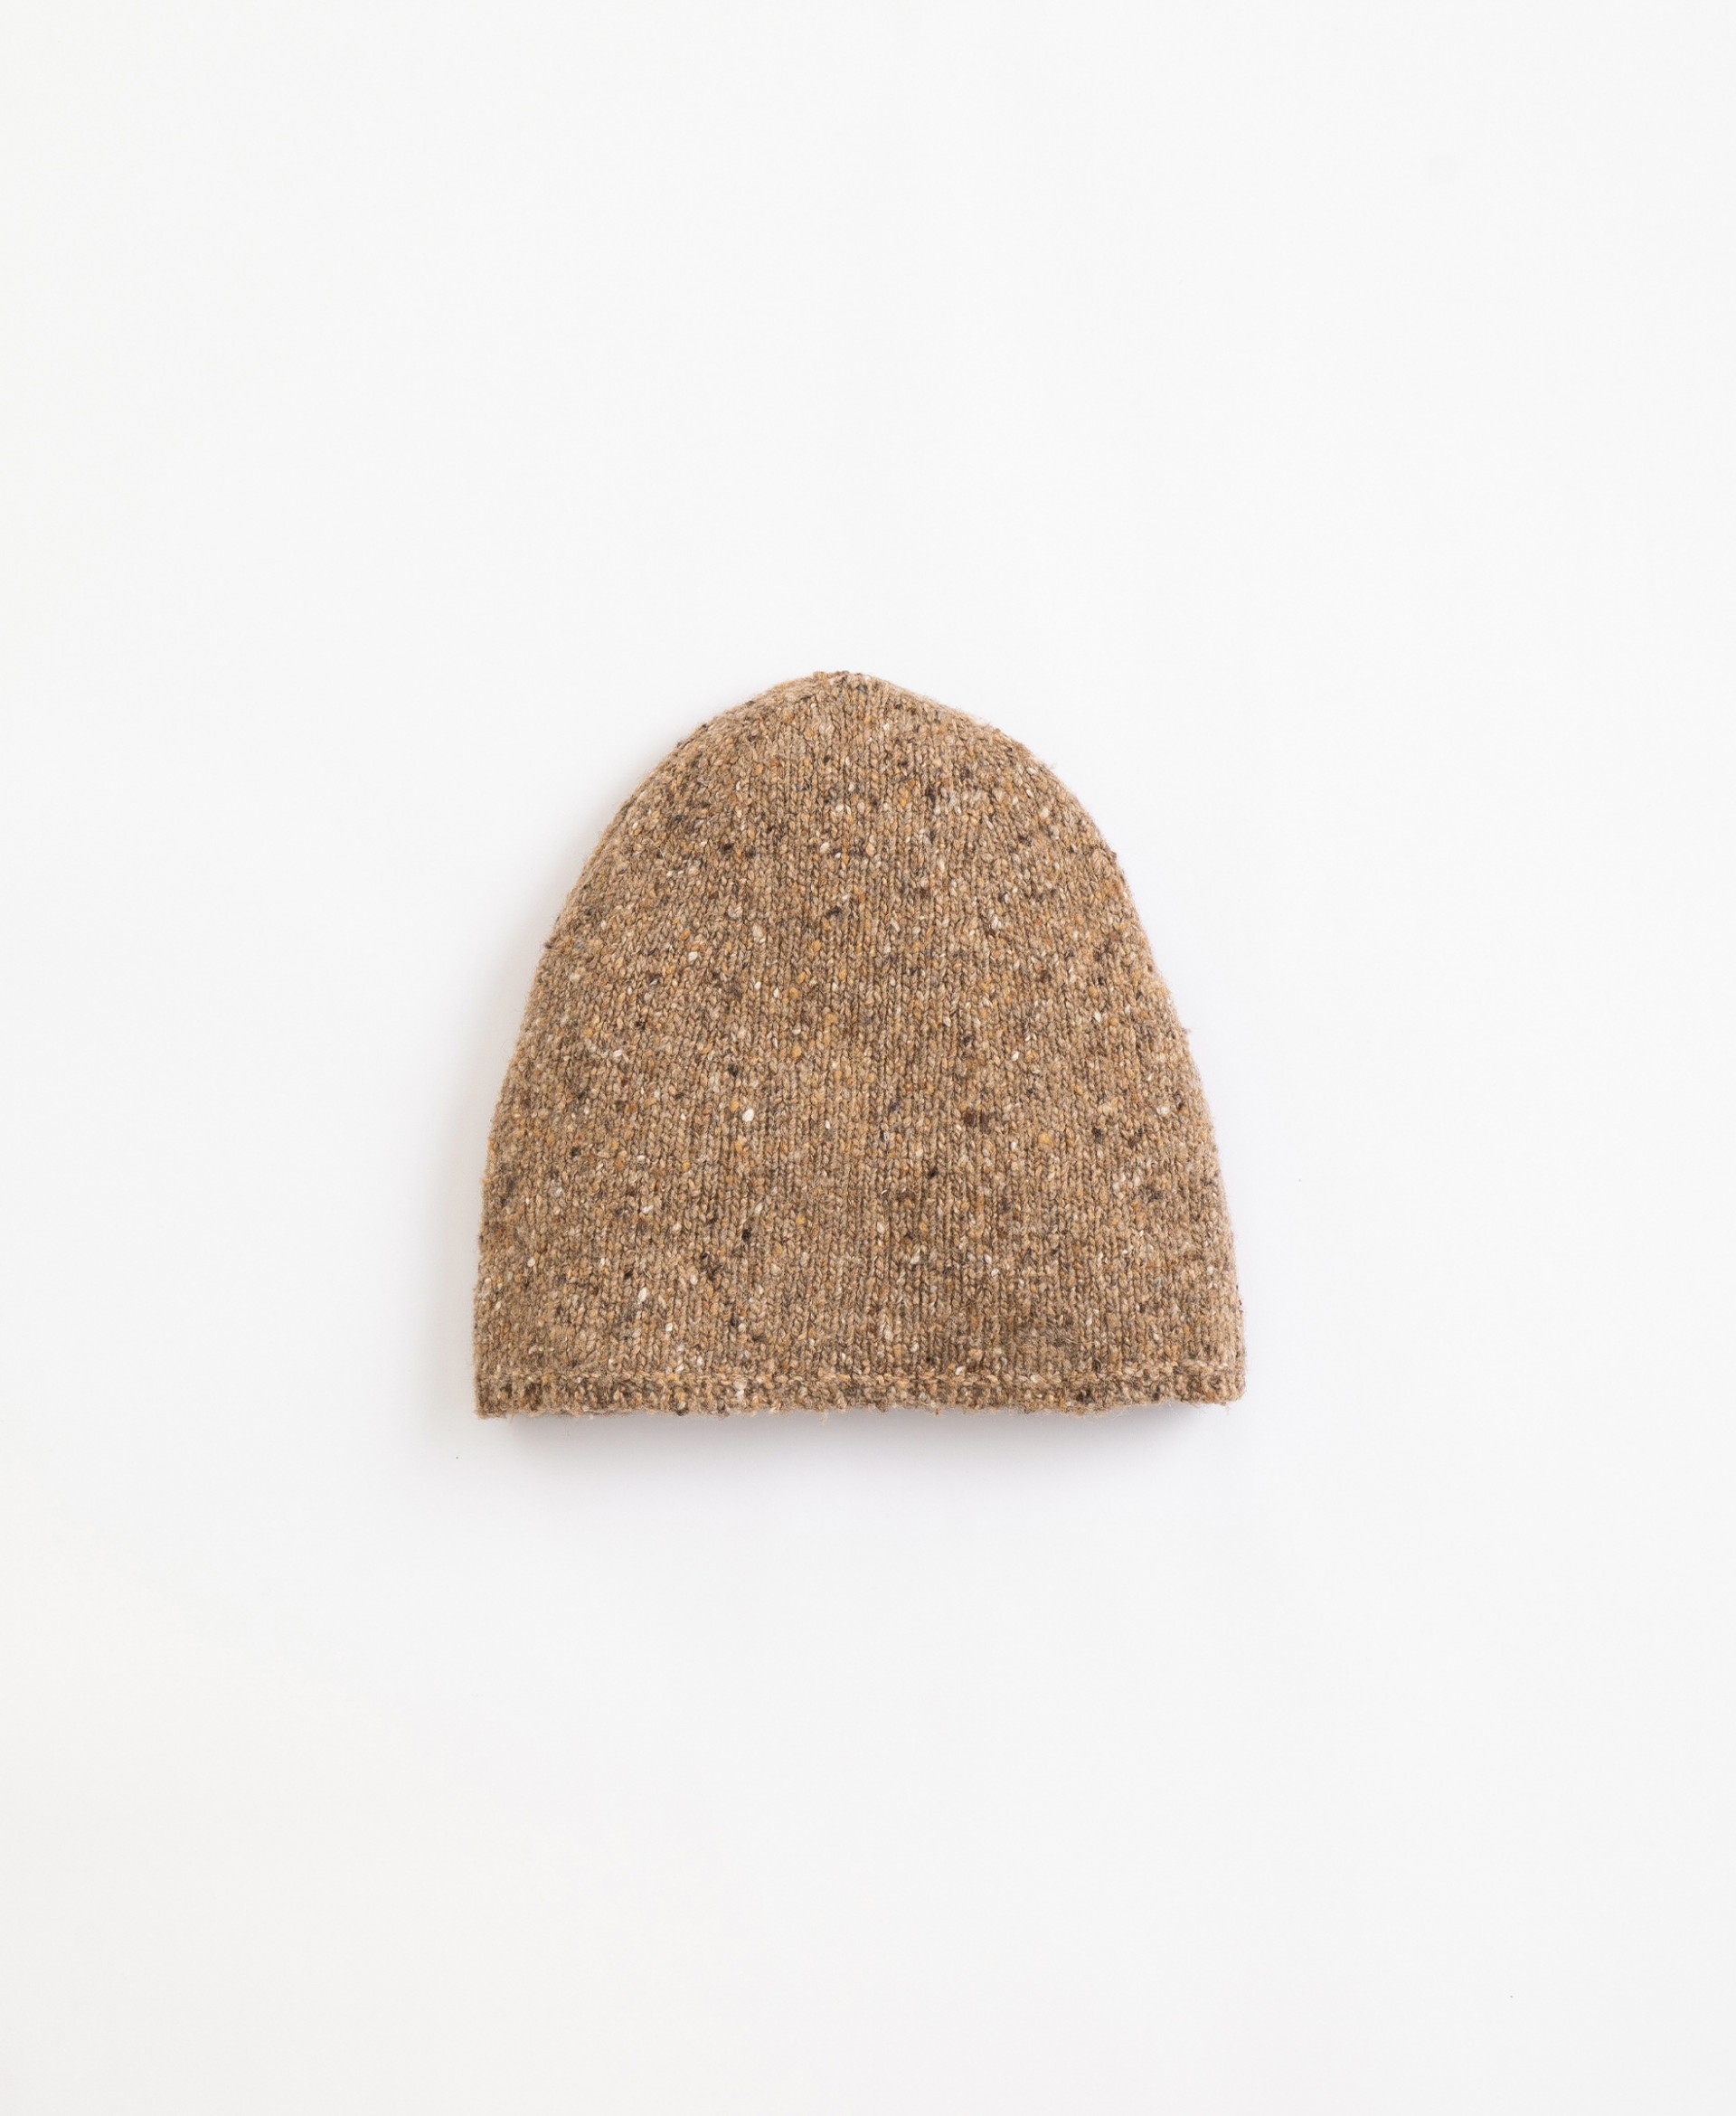 Beanie with recycled fibres | Illustration